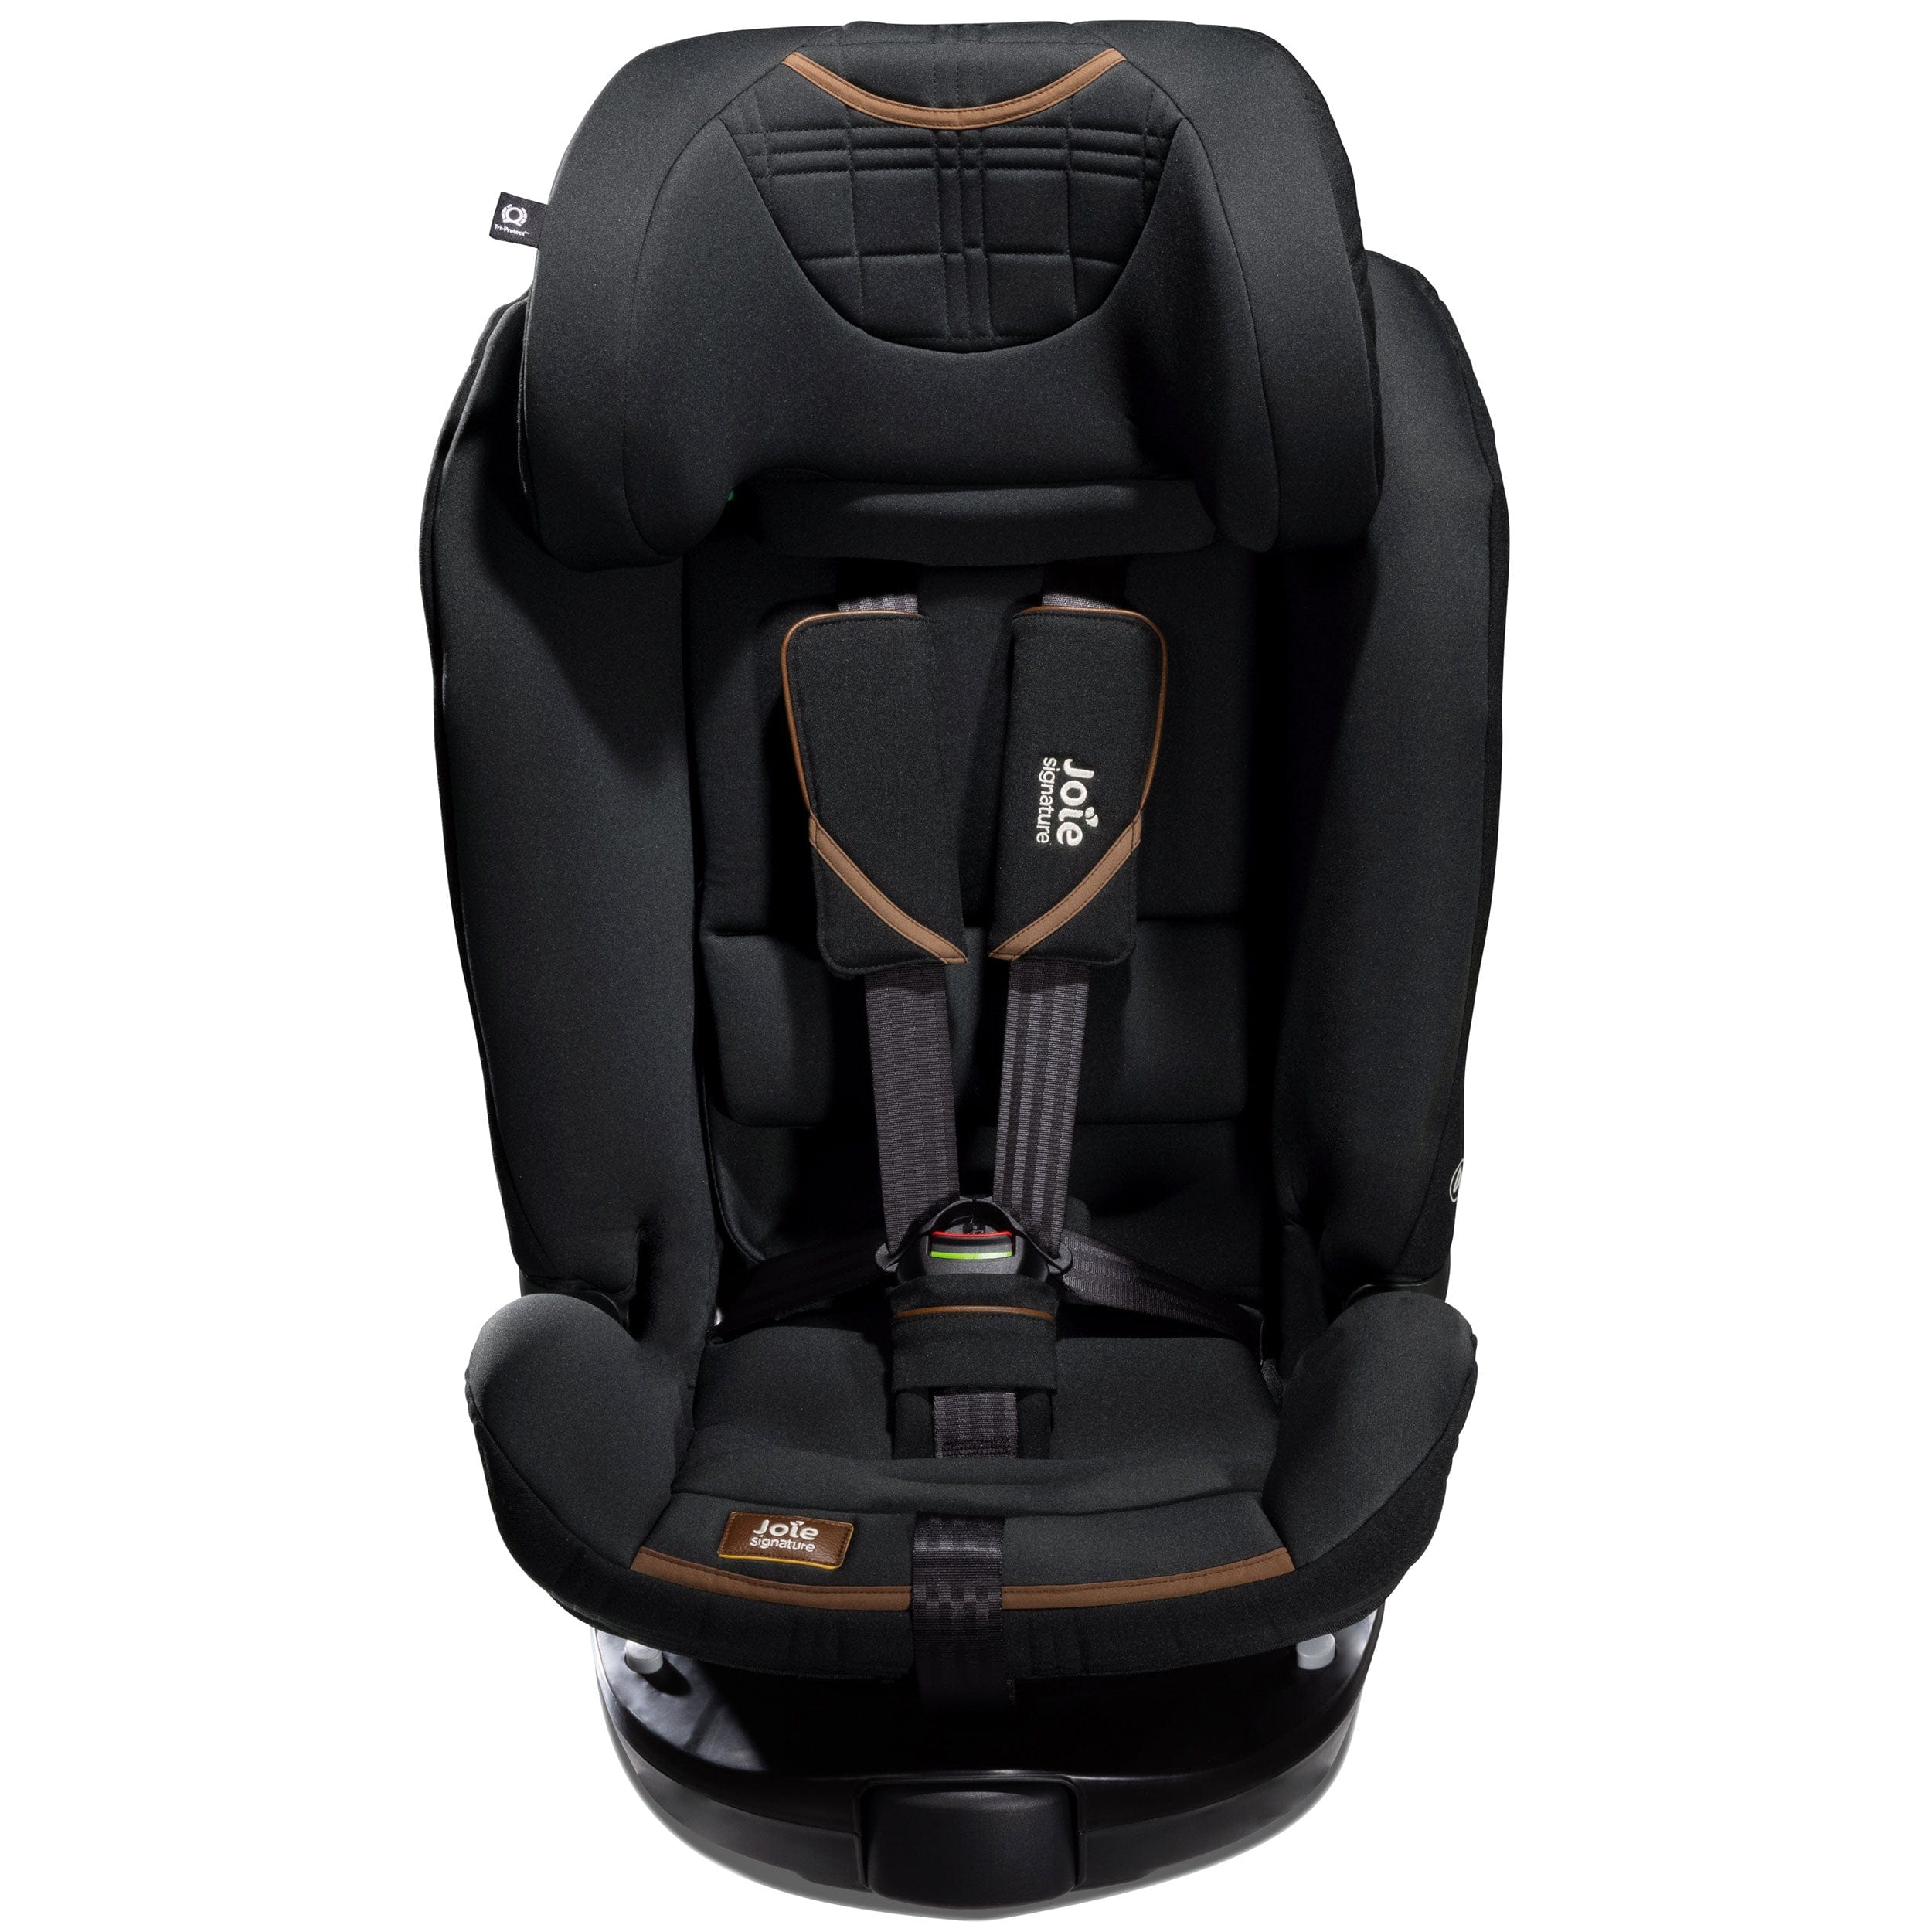 Joie i-Spin XL - Eclipse i-Size Car Seats C2205AAECL000 5056080615875